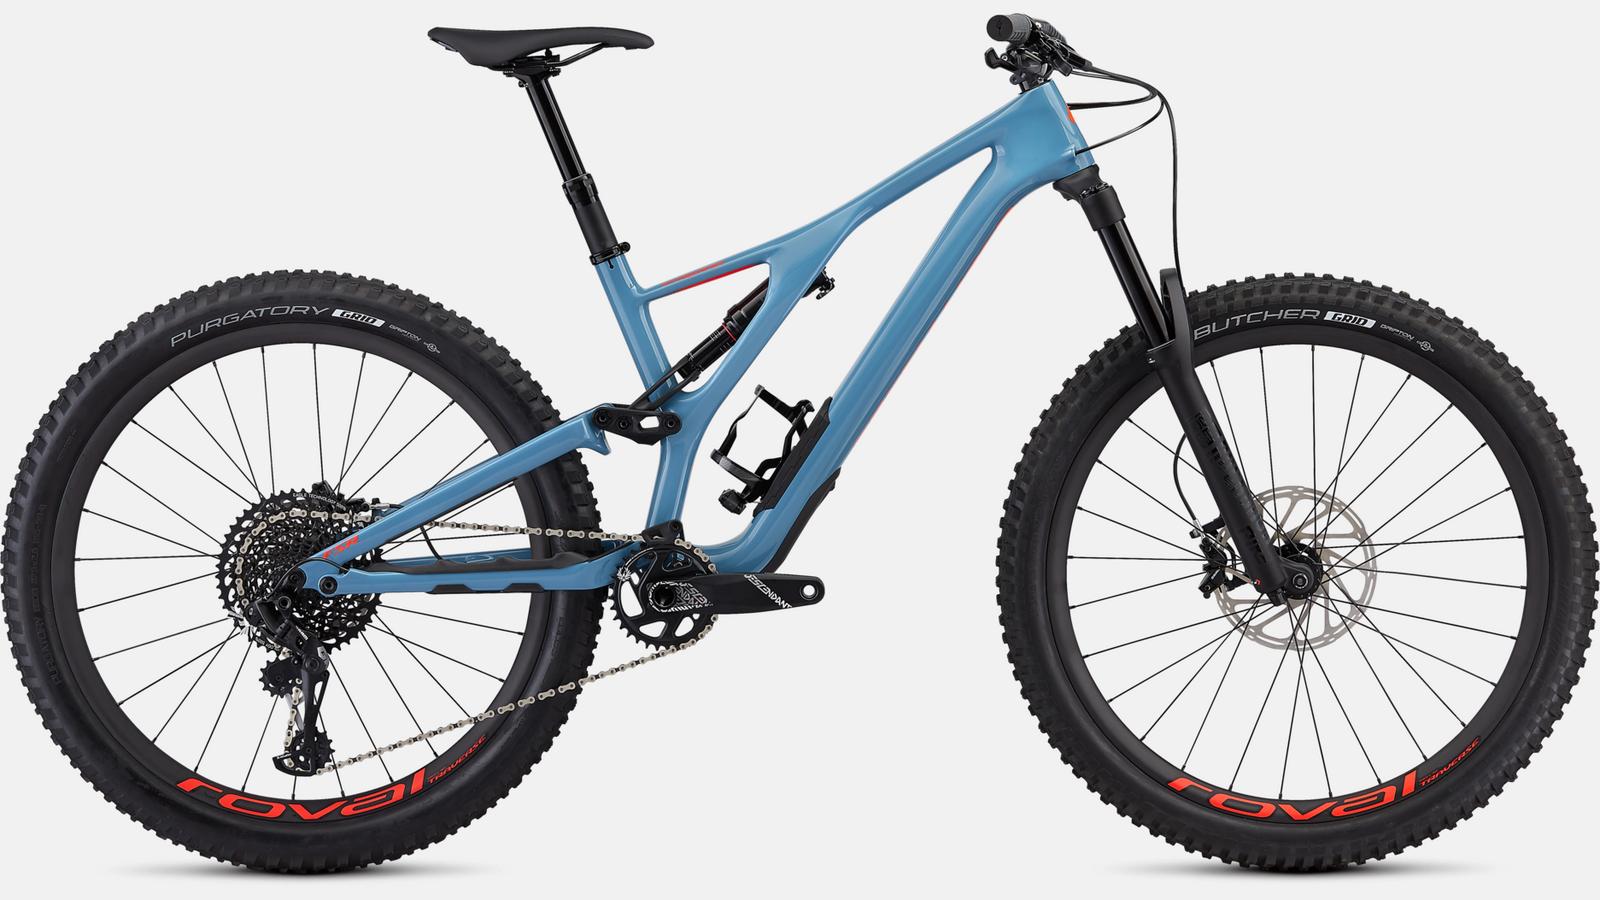 Touch-up paint for 2019 Specialized Men's Stumpjumper Expert 27.5 - Gloss Storm Grey